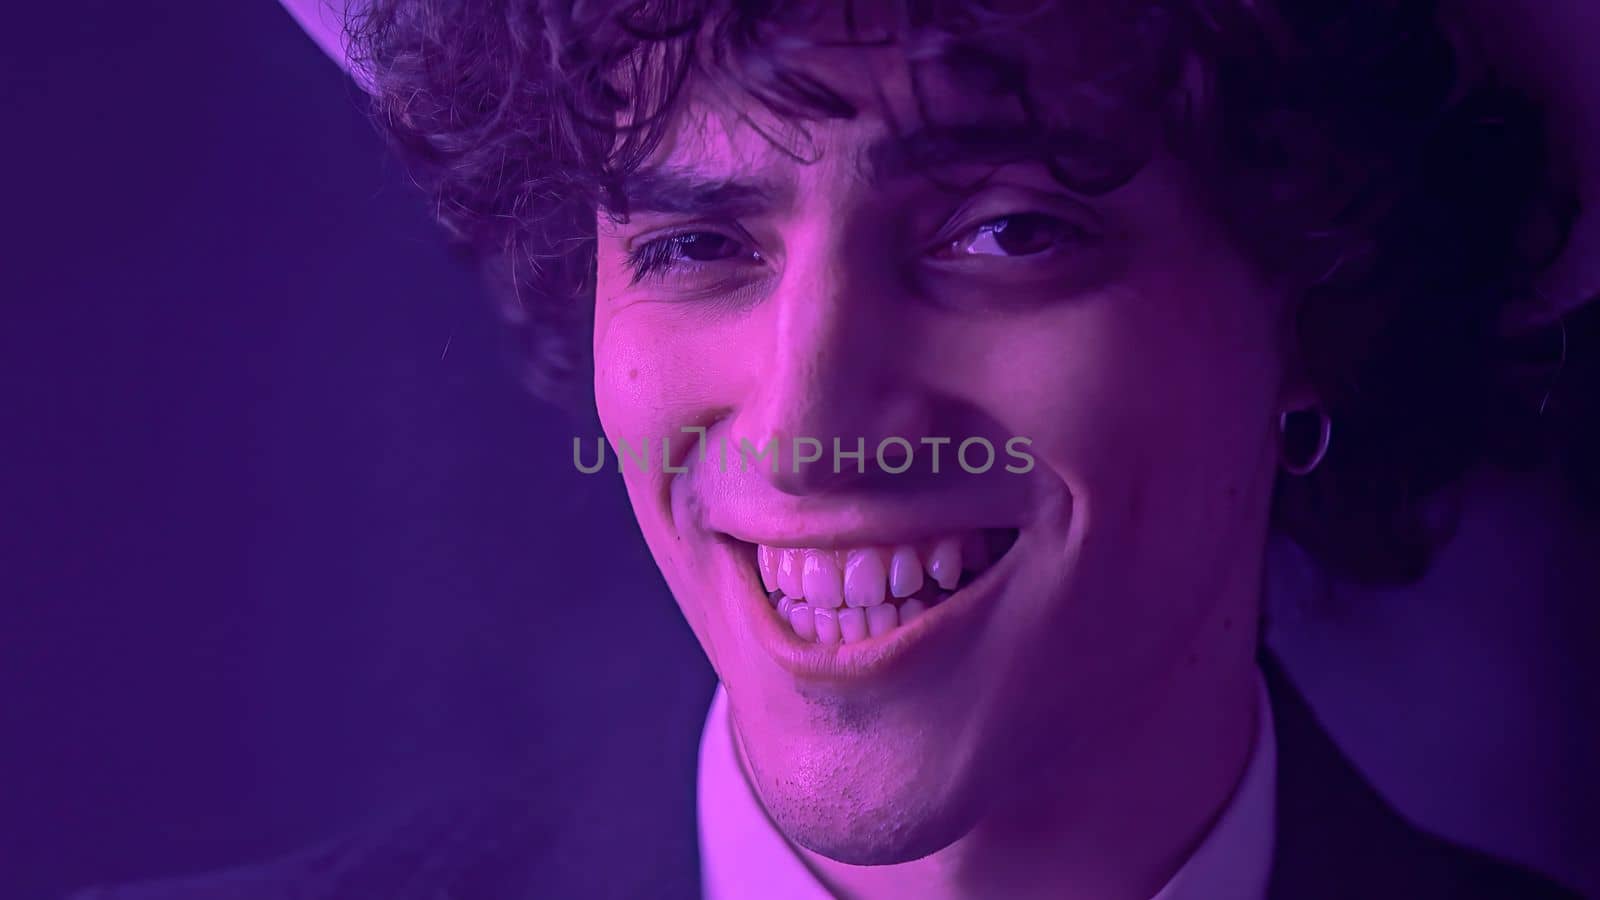 An attractive young man with messy hair and a chiseled jawline beams at the camera with a toothy smile. With a background of deep darkness, this handsome individual exudes charm and inviting expression.